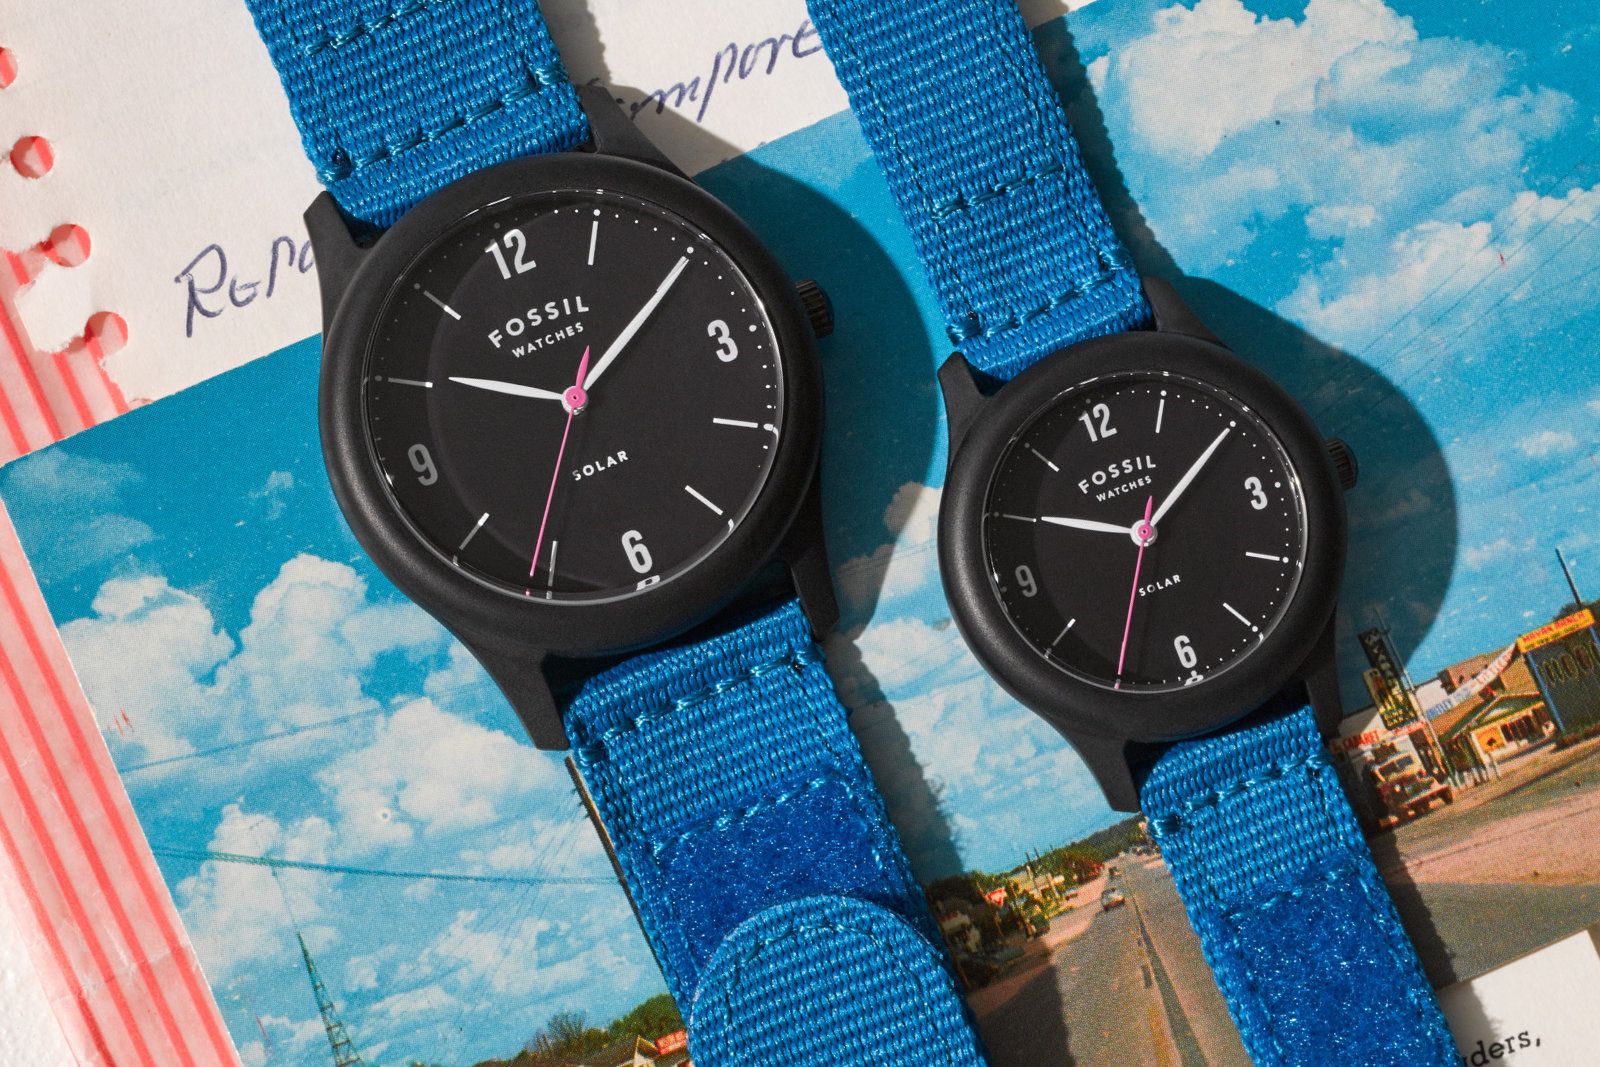 Fossil Solar watch launched features solar powered charging and bio-plastic casing image 1